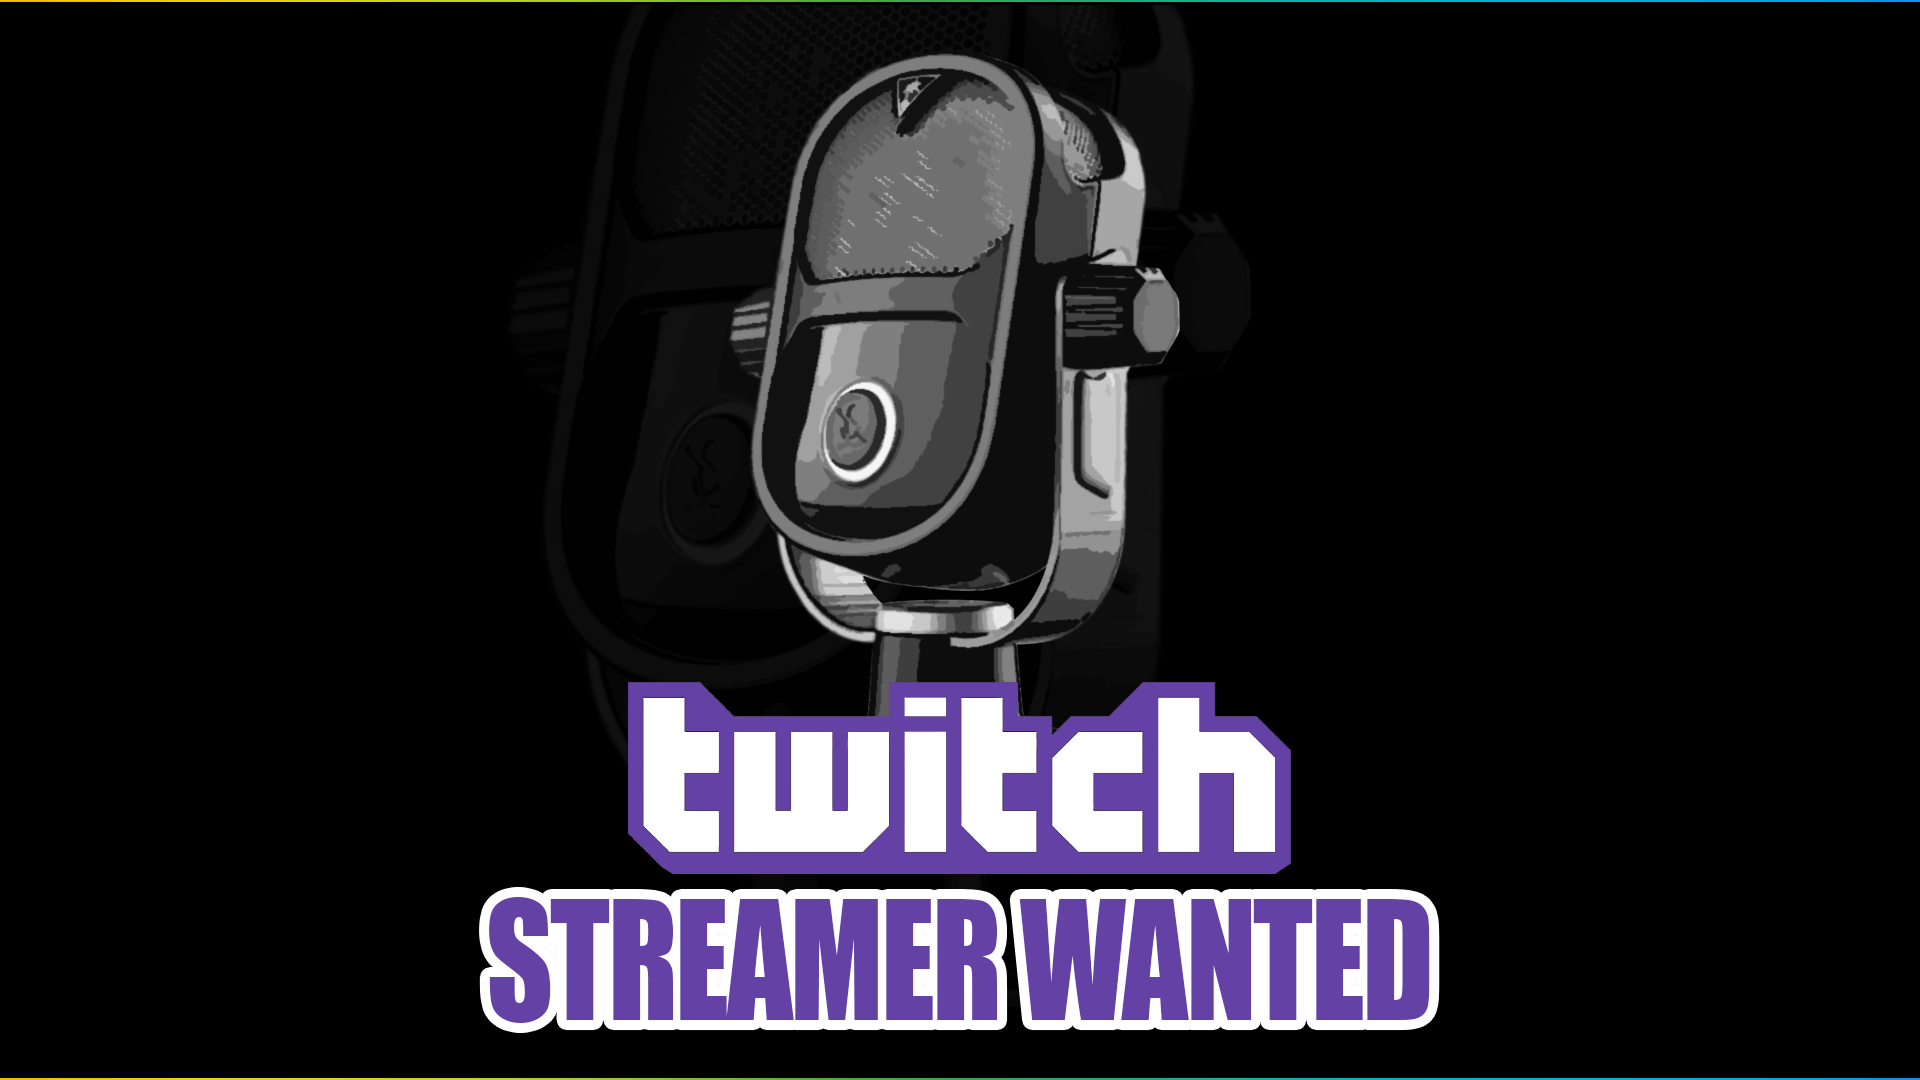 Twitch Streamer Logo - We're looking for Twitch Streamers